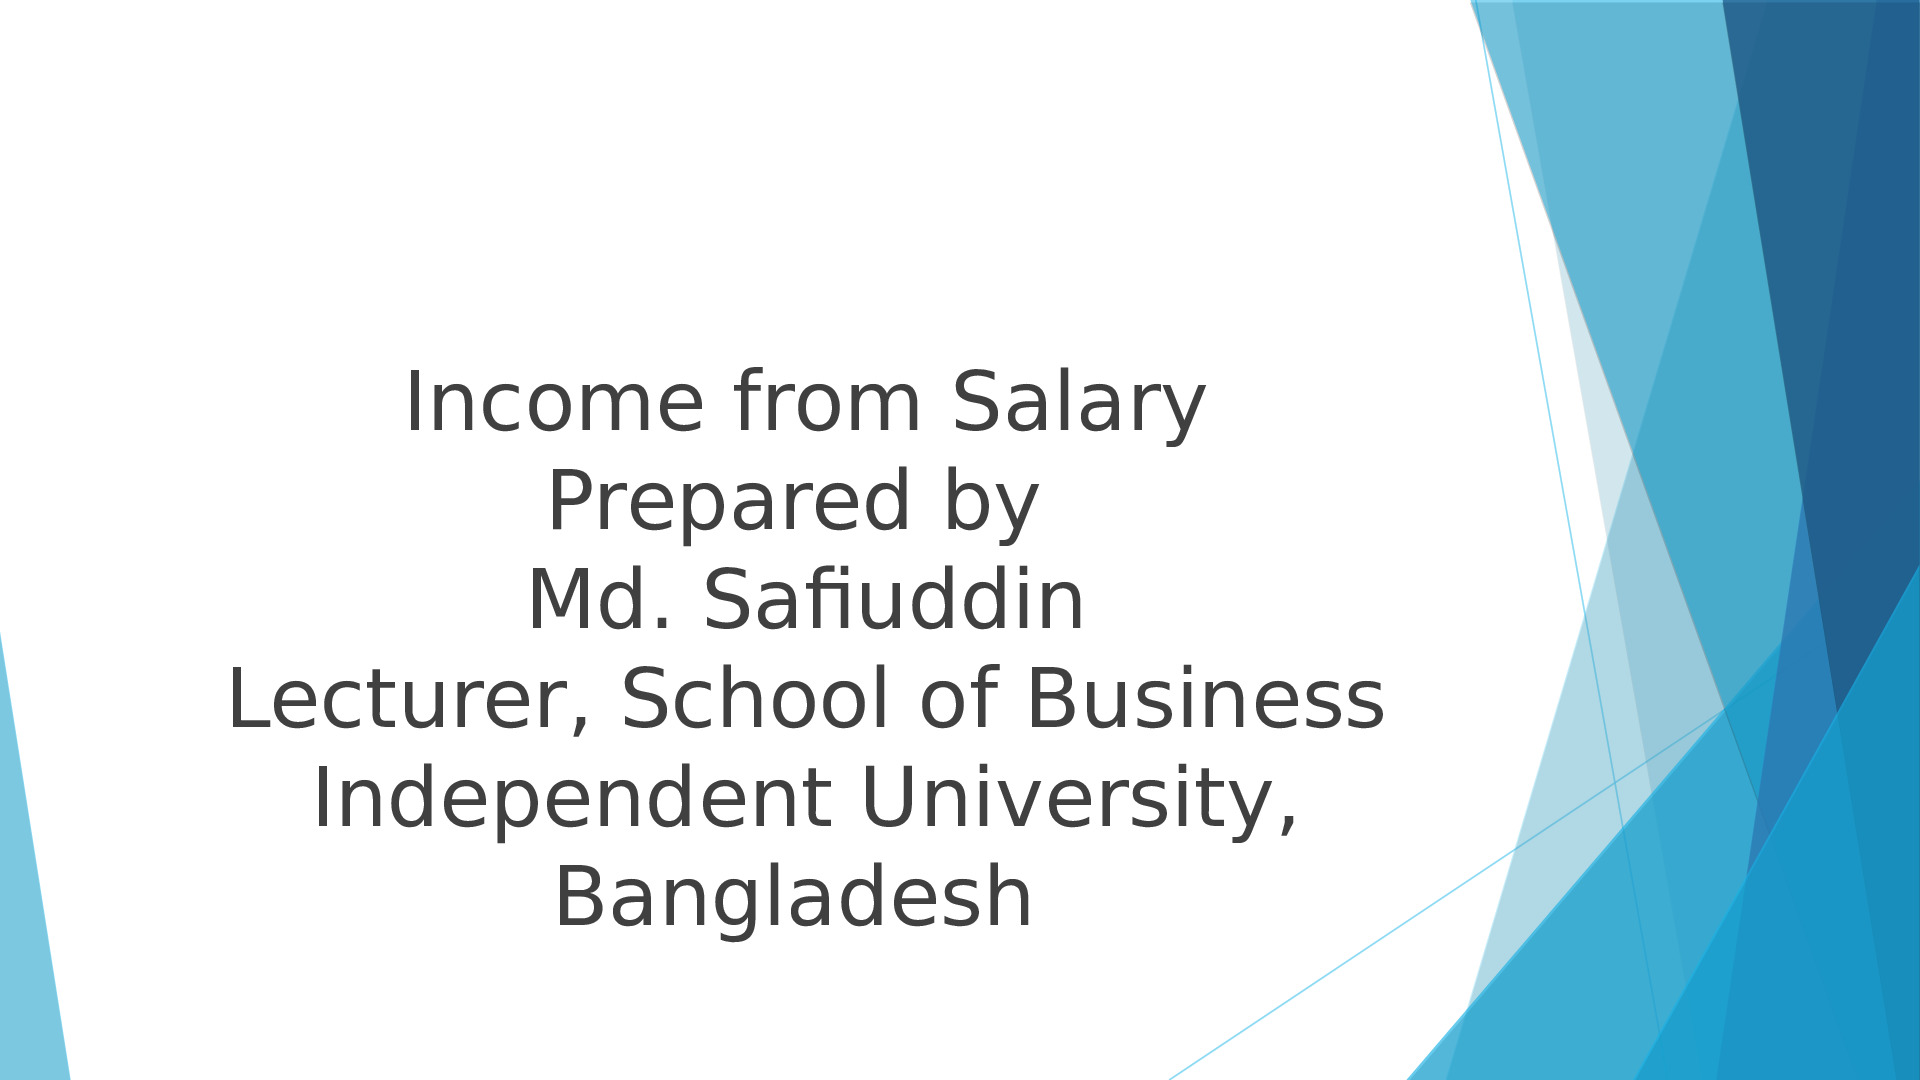 Salary_income.pptx